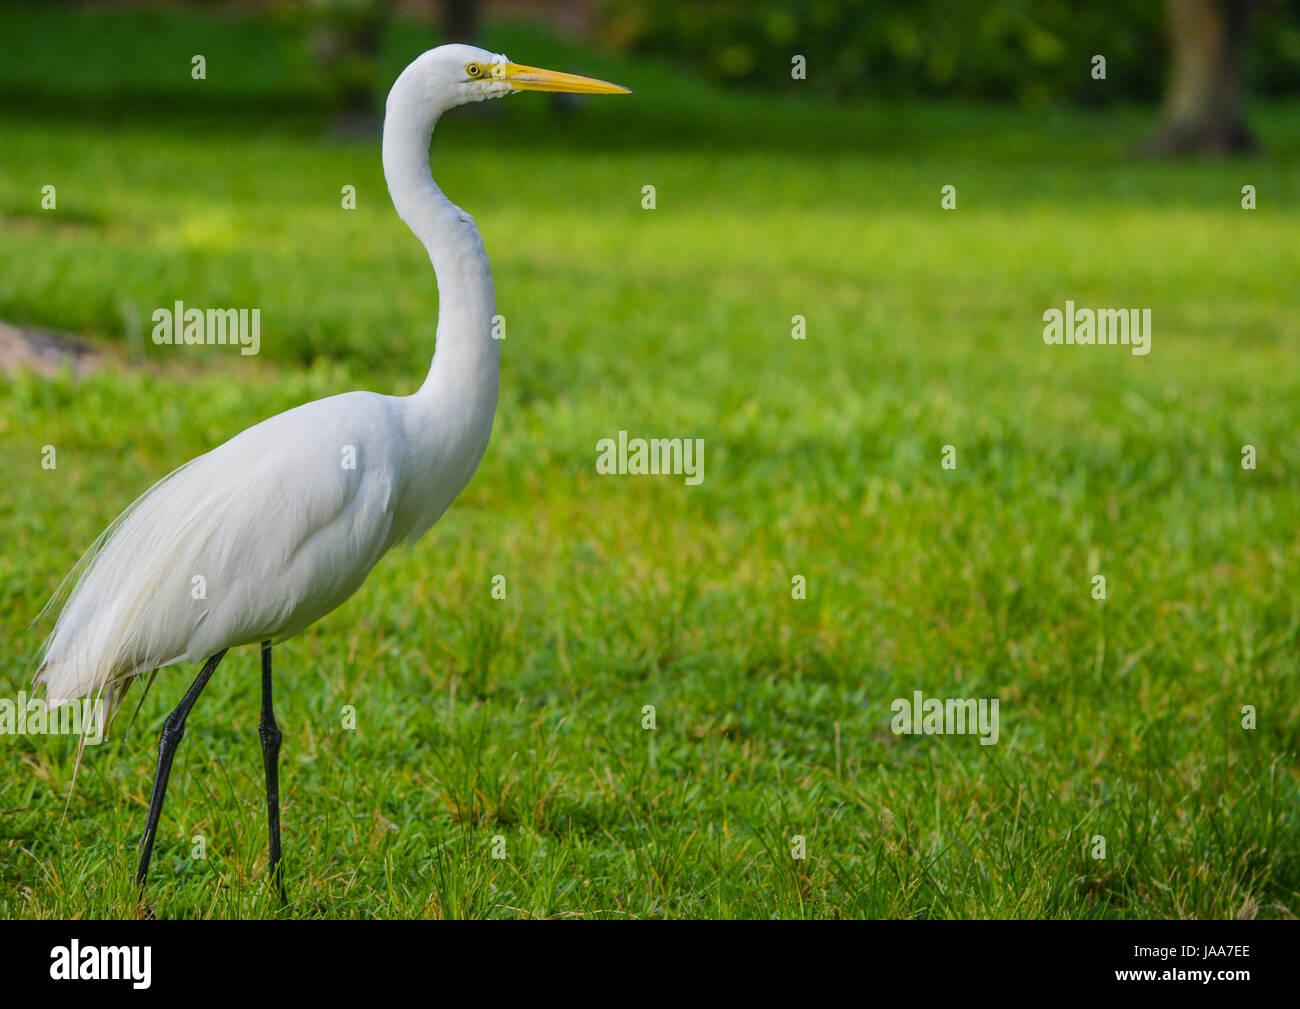 A Great White Heron (ardea herodias occidentalis)In the park at the Largo Central Park in Largo, Florida. Stock Photo